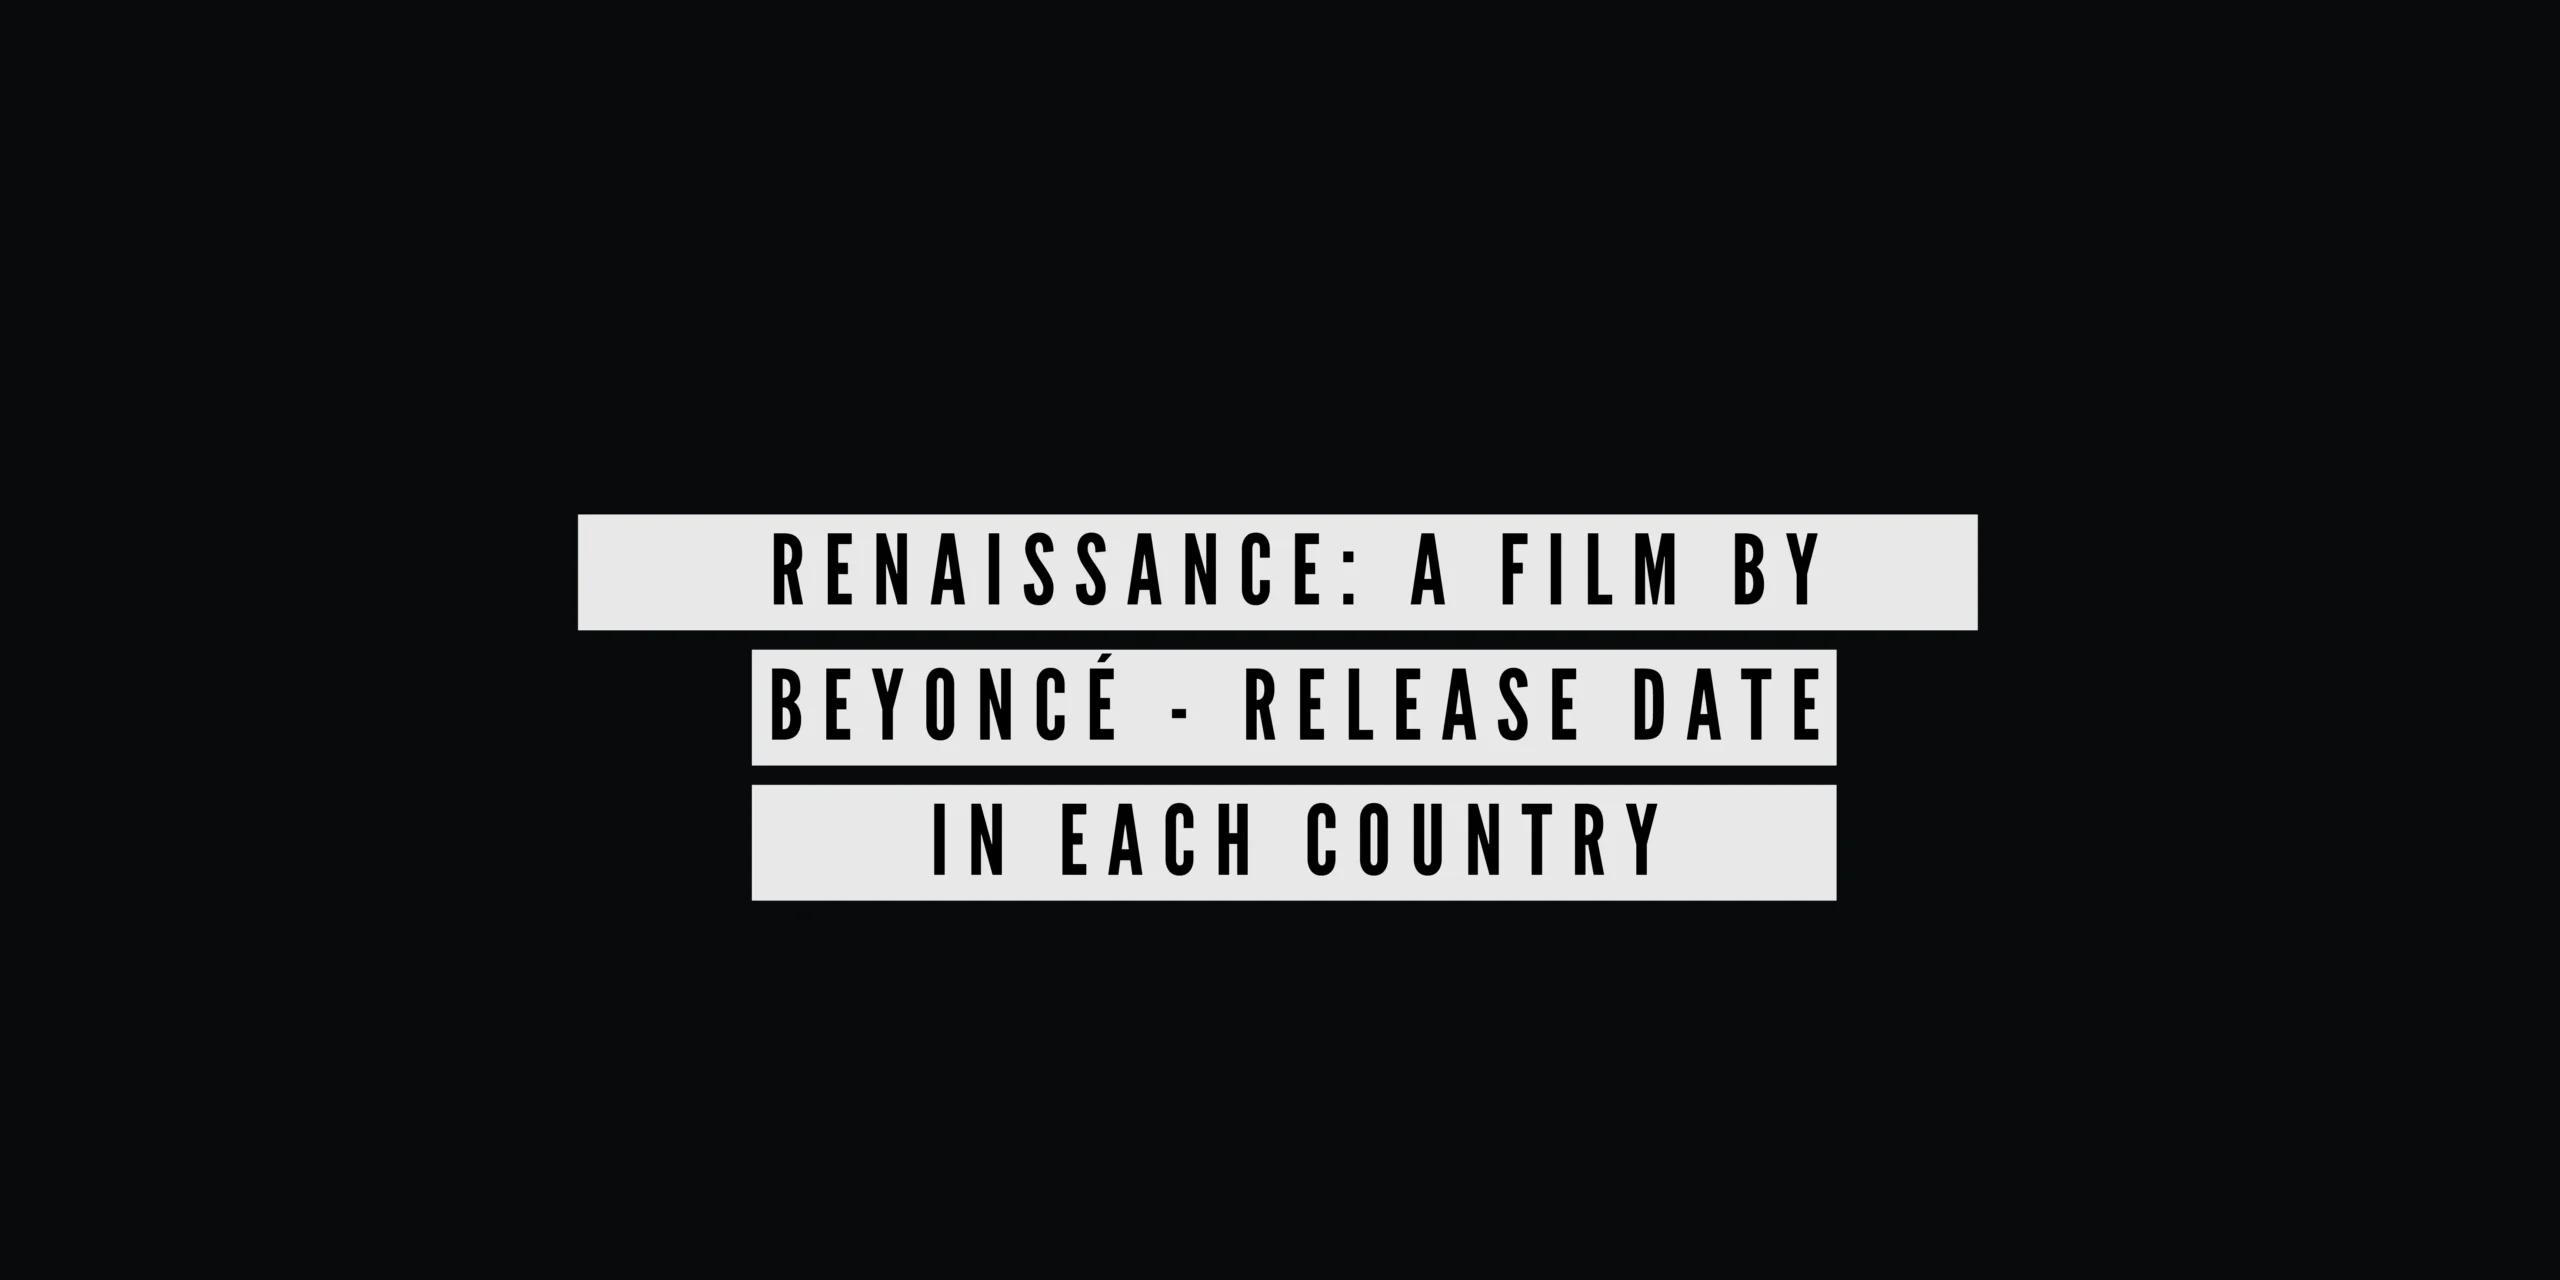 RENAISSANCE A Film by Beyoncé - Release Date In Each Country